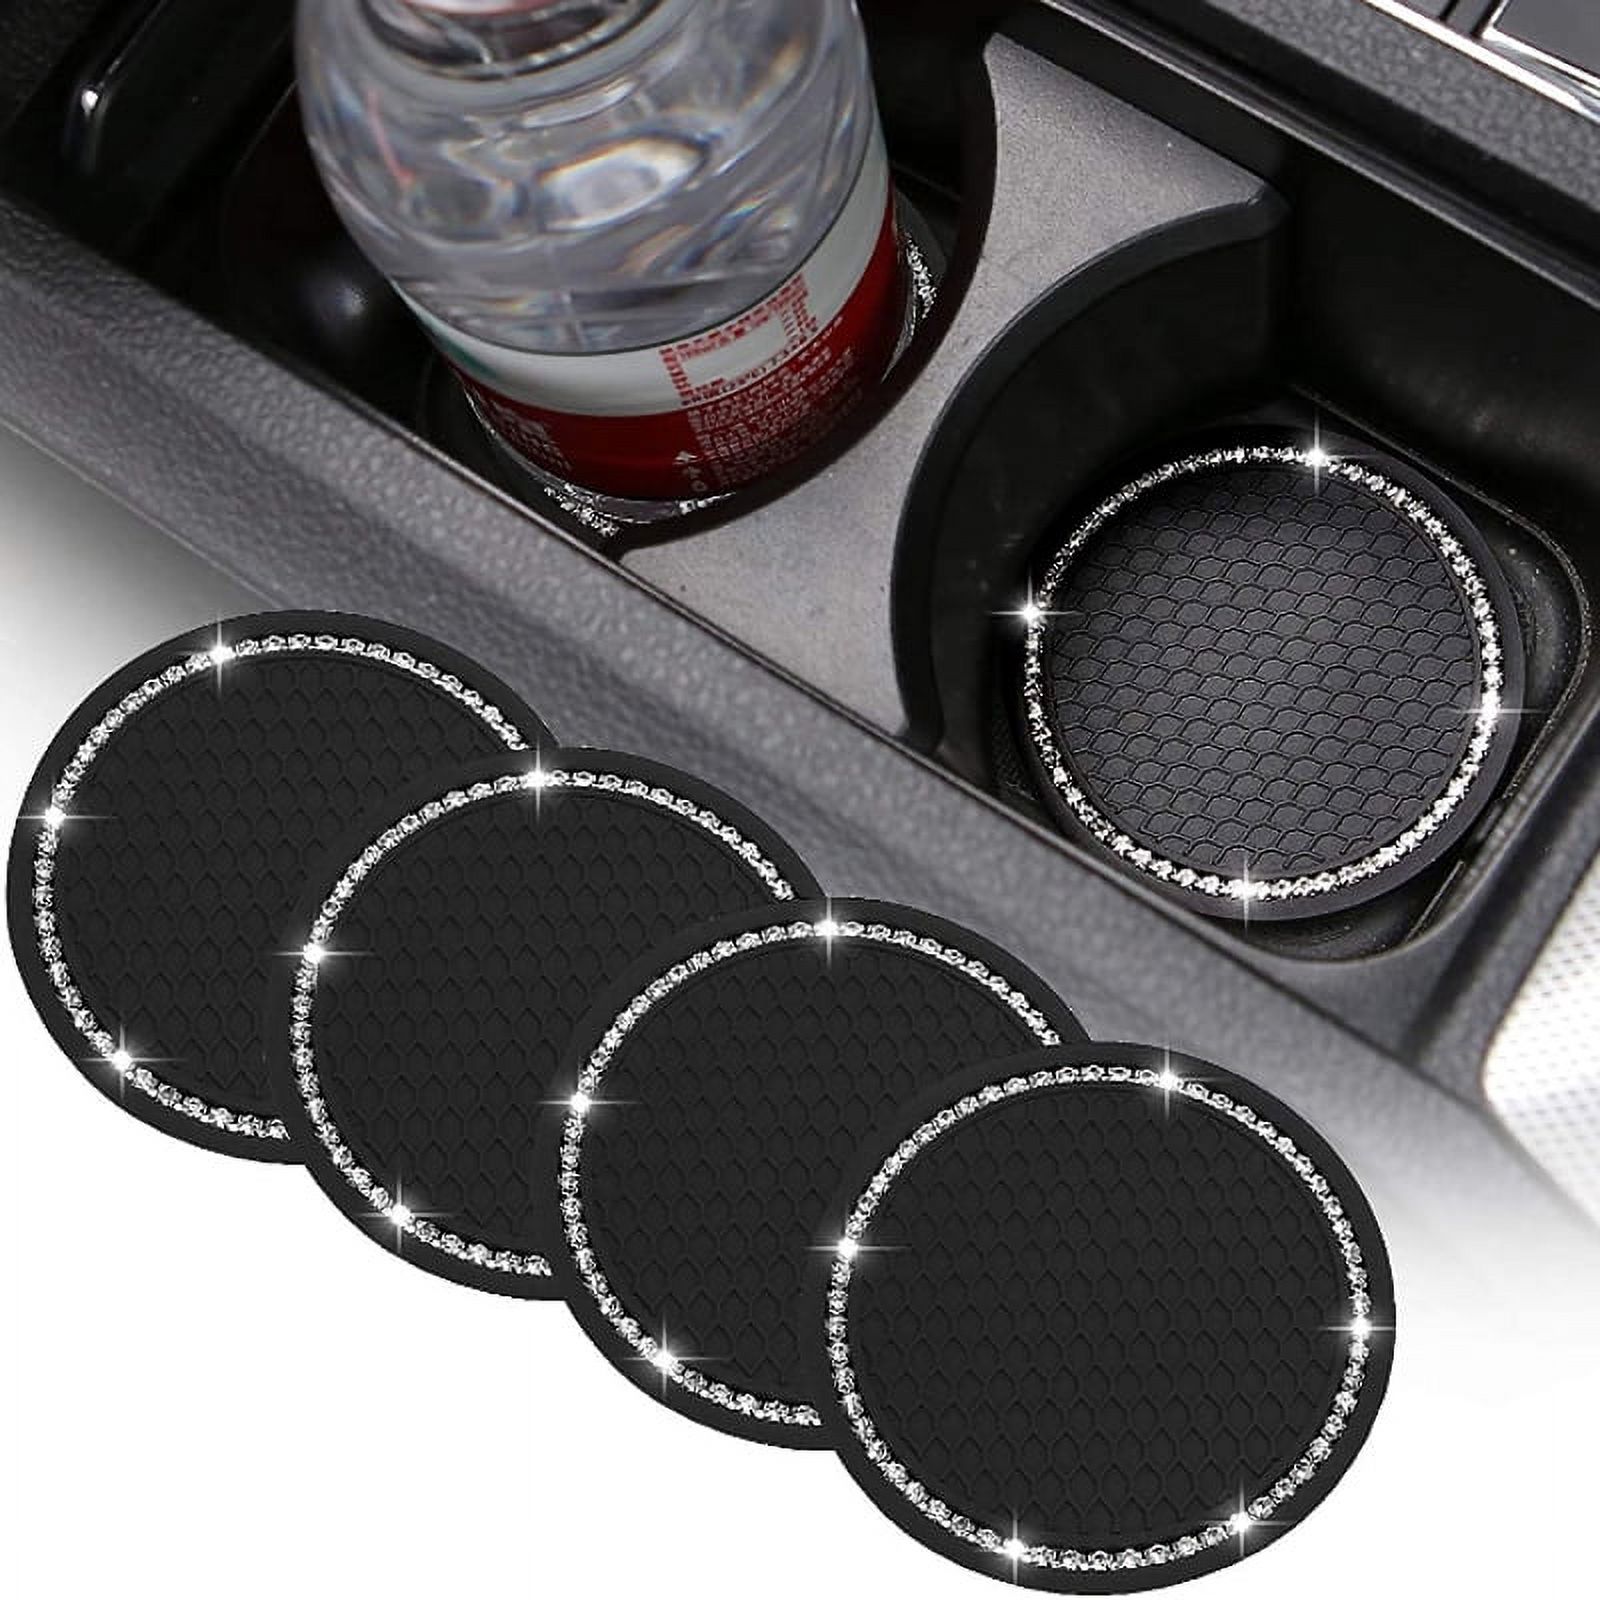 4PCS Bling Car Cup Coaster, Vehicle Car Accessories 2.75 inch, Rhinestone Anti Slip Insert Coaster, Suitable for Most Car Interior, Car Bling for Women,Party,Birthday - image 1 of 7